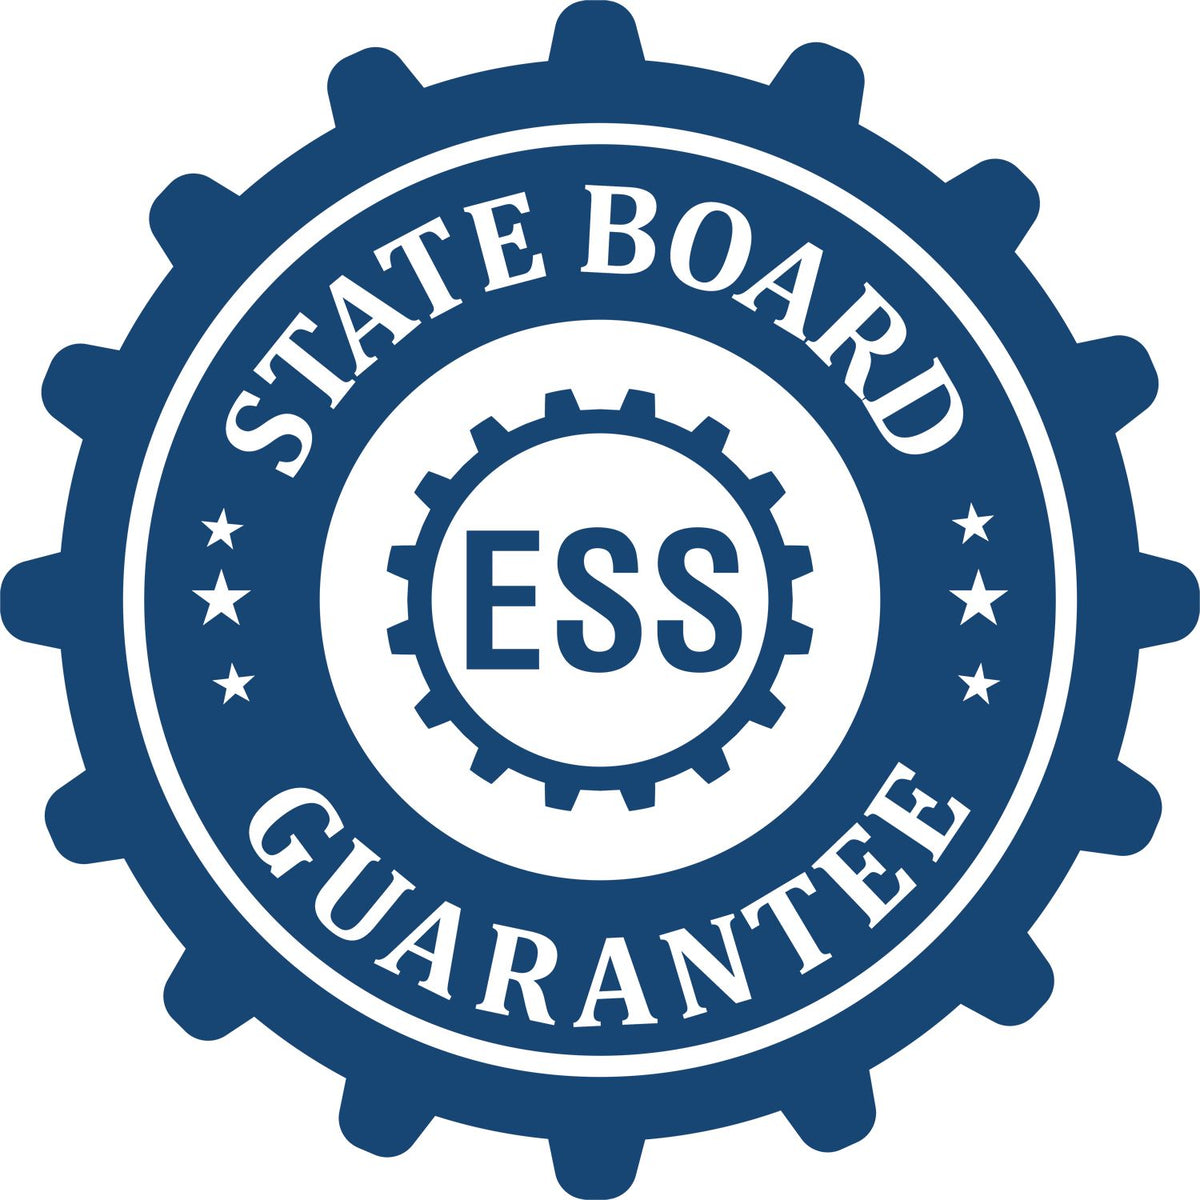 An emblem in a gear shape illustrating a state board guarantee for the Oklahoma Desk Architect Embossing Seal product.